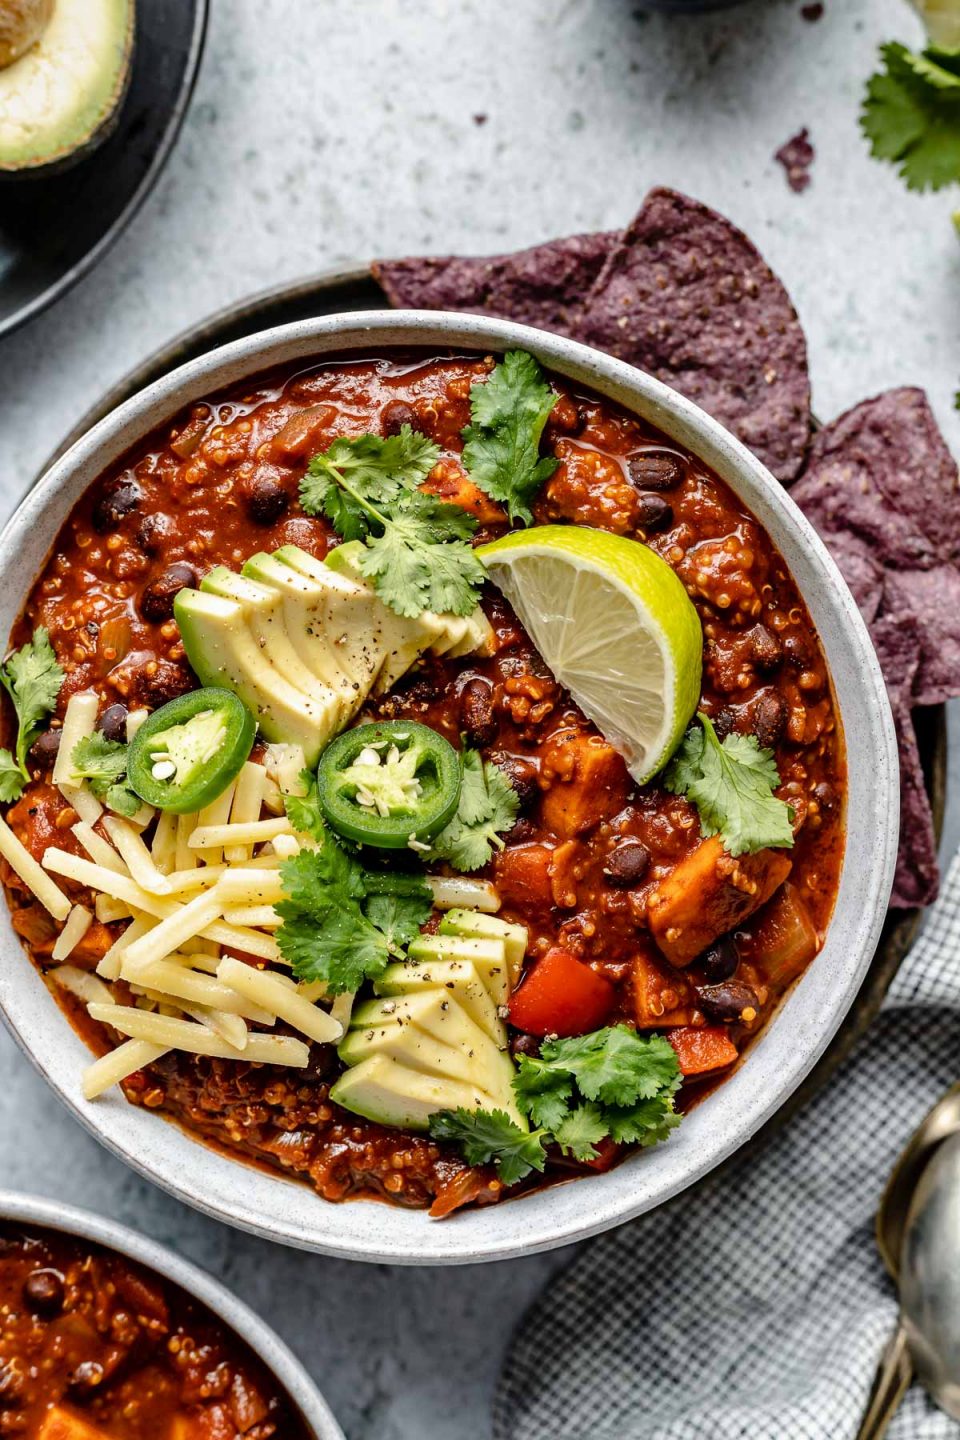 Sweet Potato Quinoa Chili shown in 2 soup bowls, topped with avocado, jalapeno, shredded vegan cheese, lime wedges & cilantro leaves. The bowls sit atop a light blue surface, next to a checkered blue & white linen, soup spoons, garnishes (sliced jalapeno, lime wedges, tortilla chips, etc.).